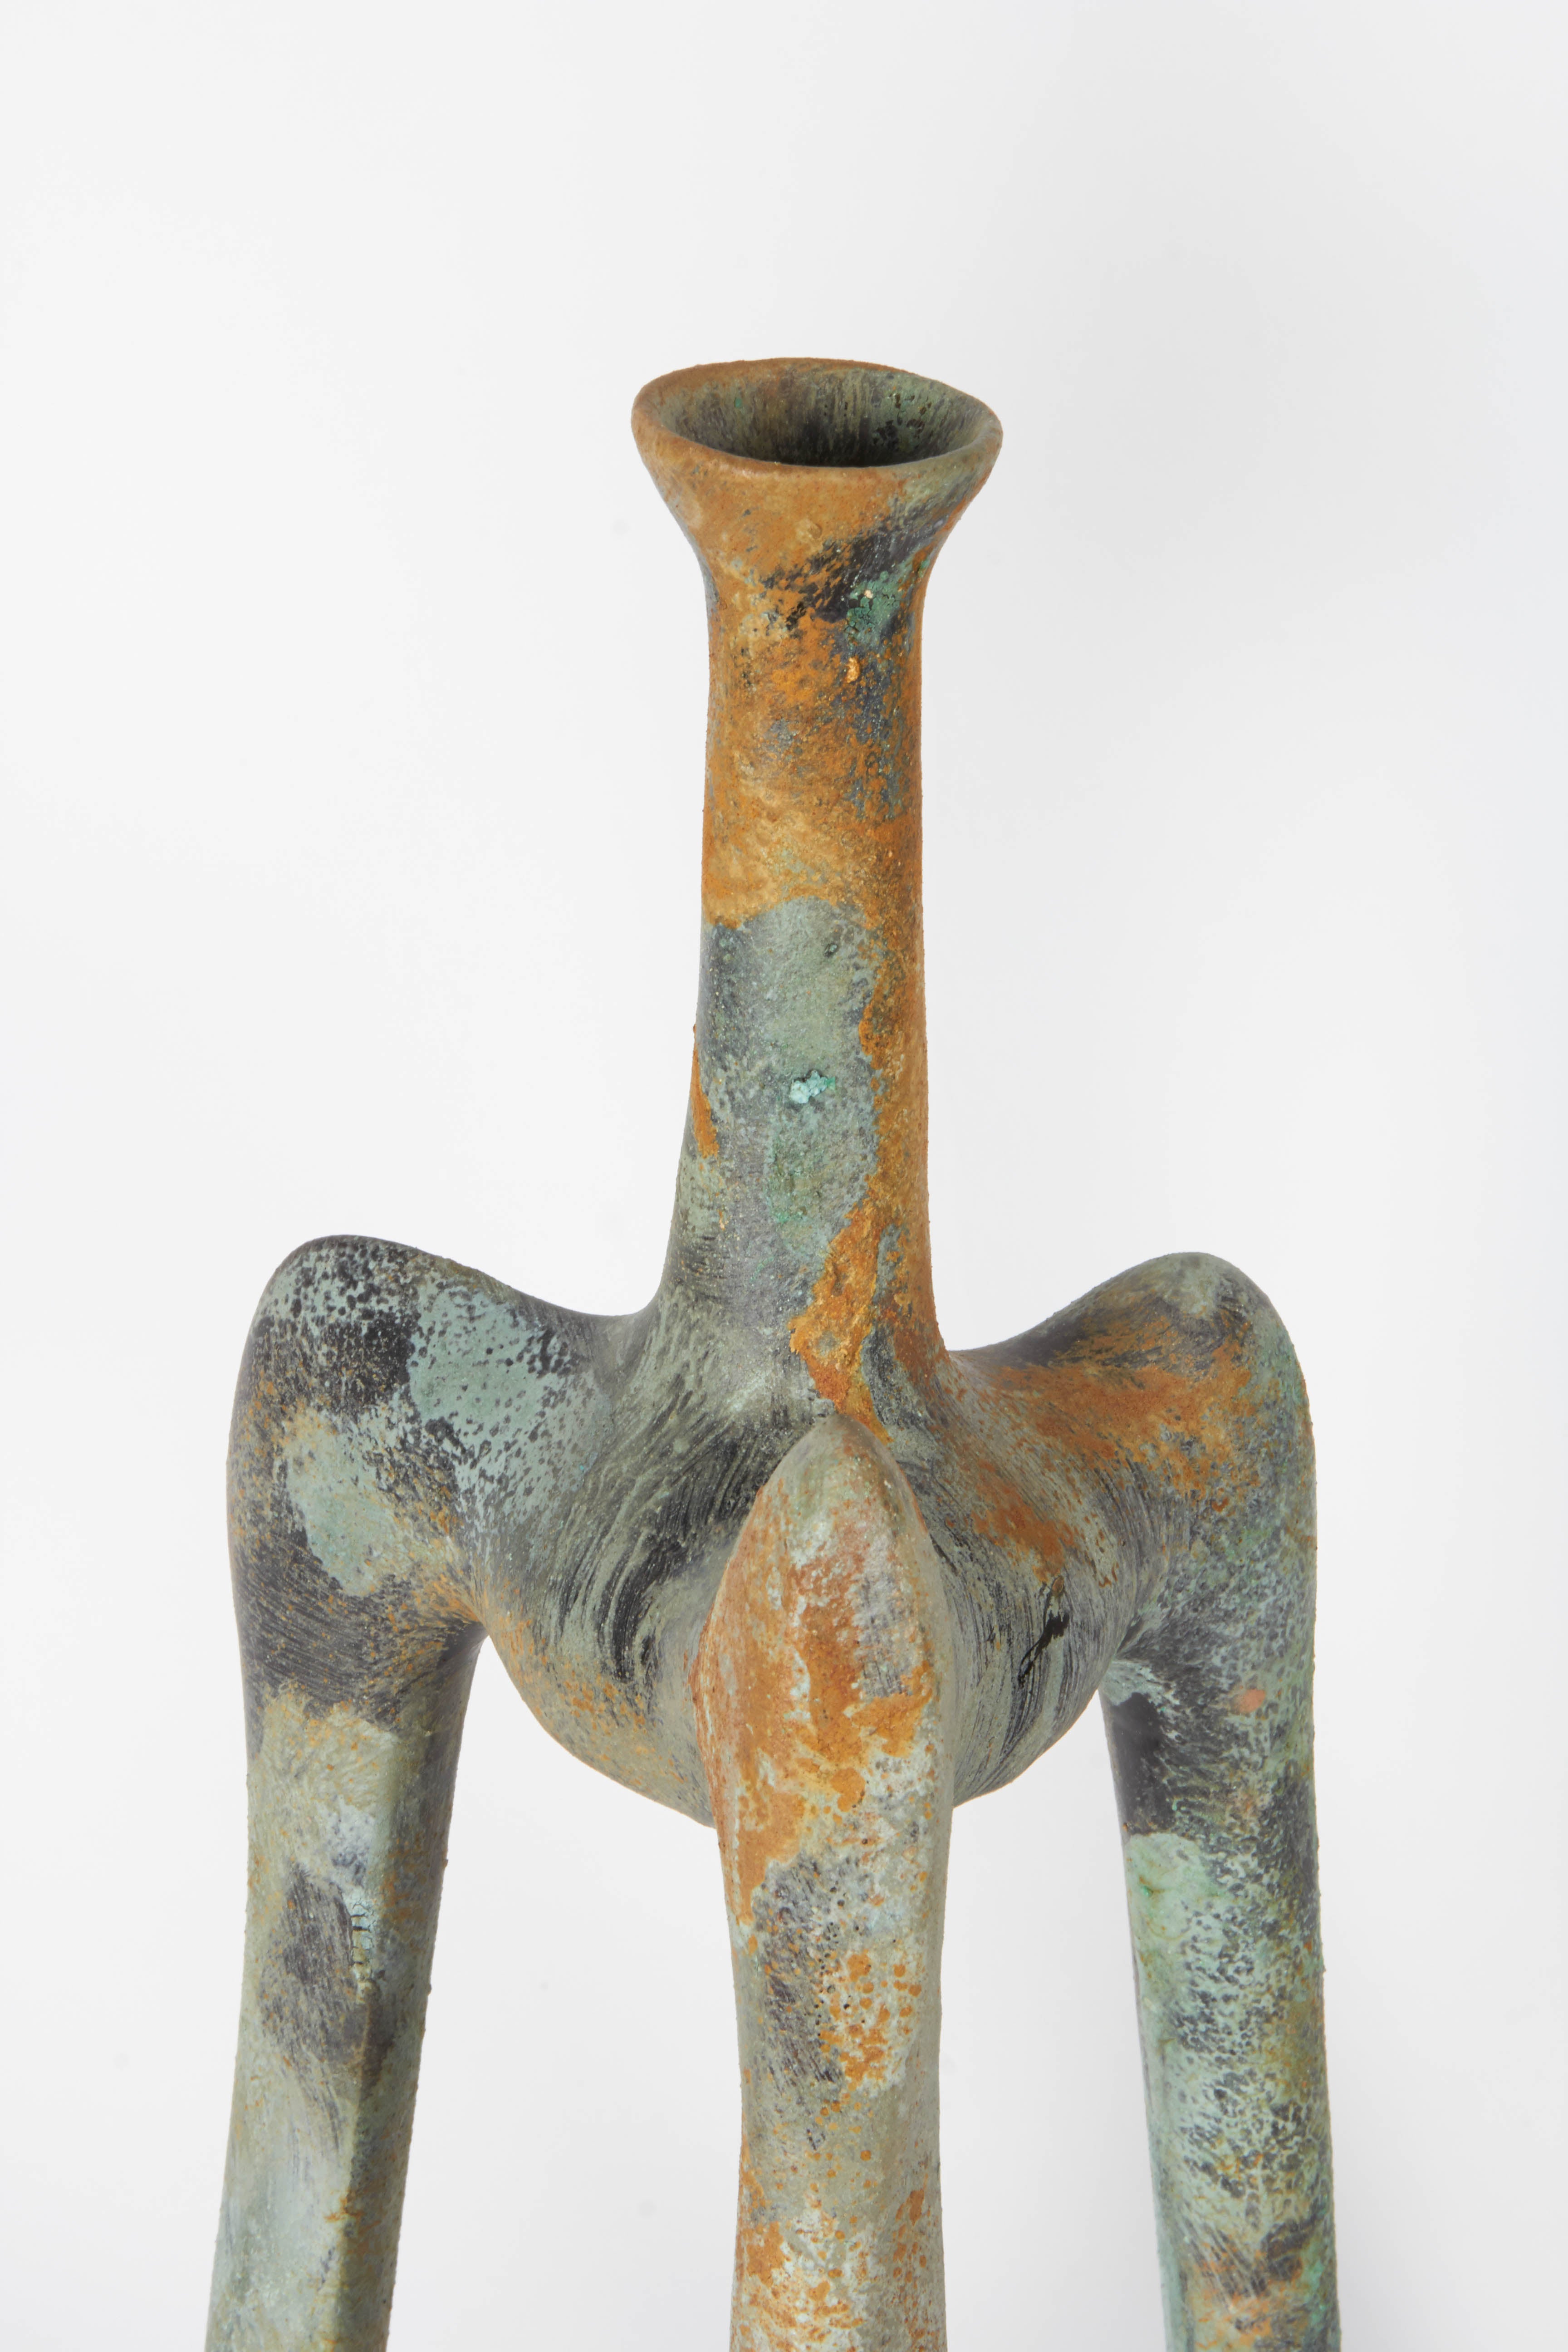 Richard Hirsch Ceramic Vessel and Stand, Tripod Vessels Collection, 1987 - 1994 In Good Condition For Sale In New York, NY